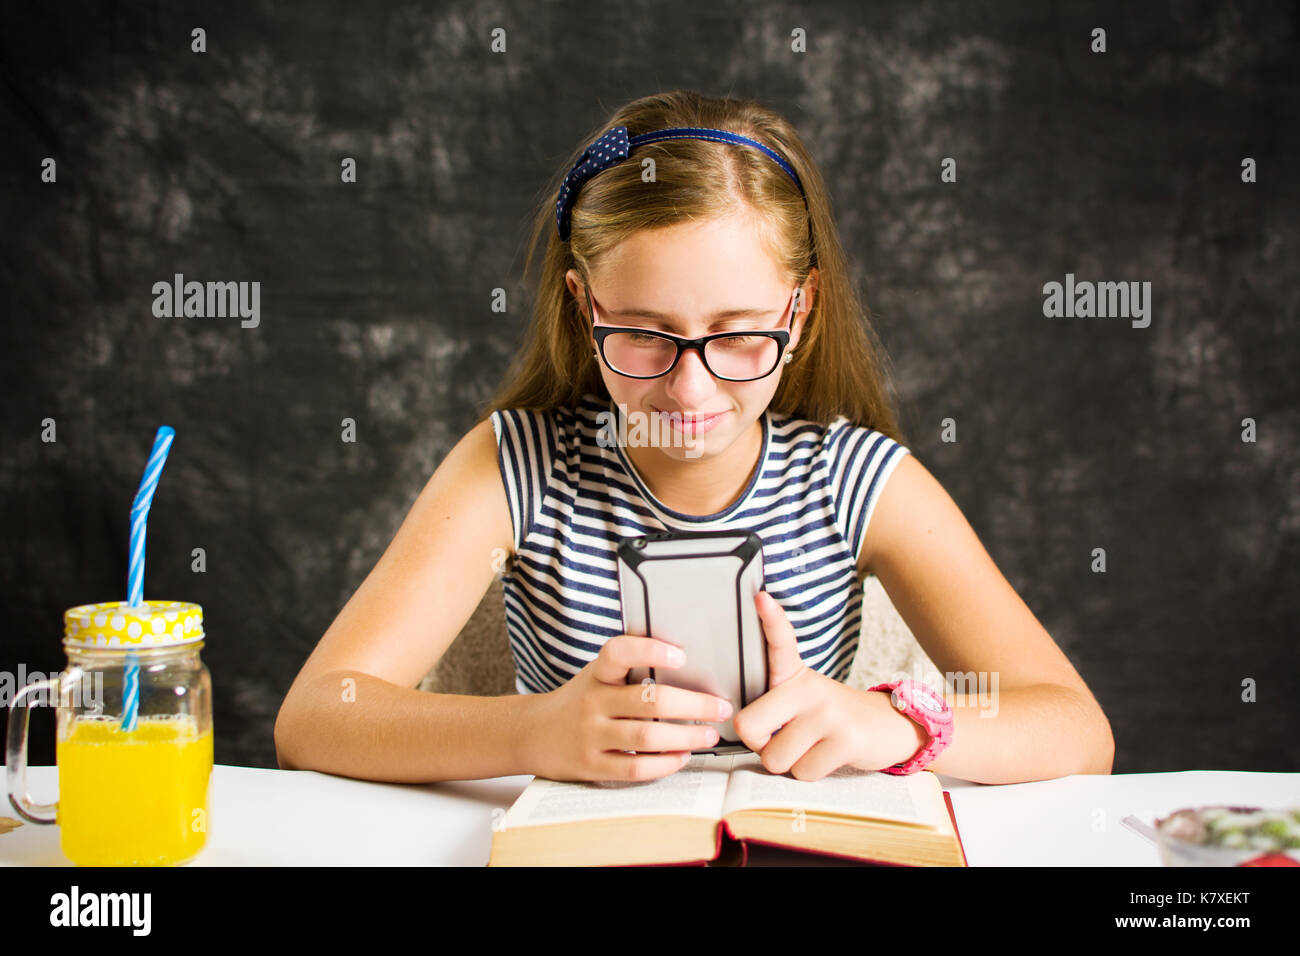 Happy teen girl reading a text and smiling Stock Photo